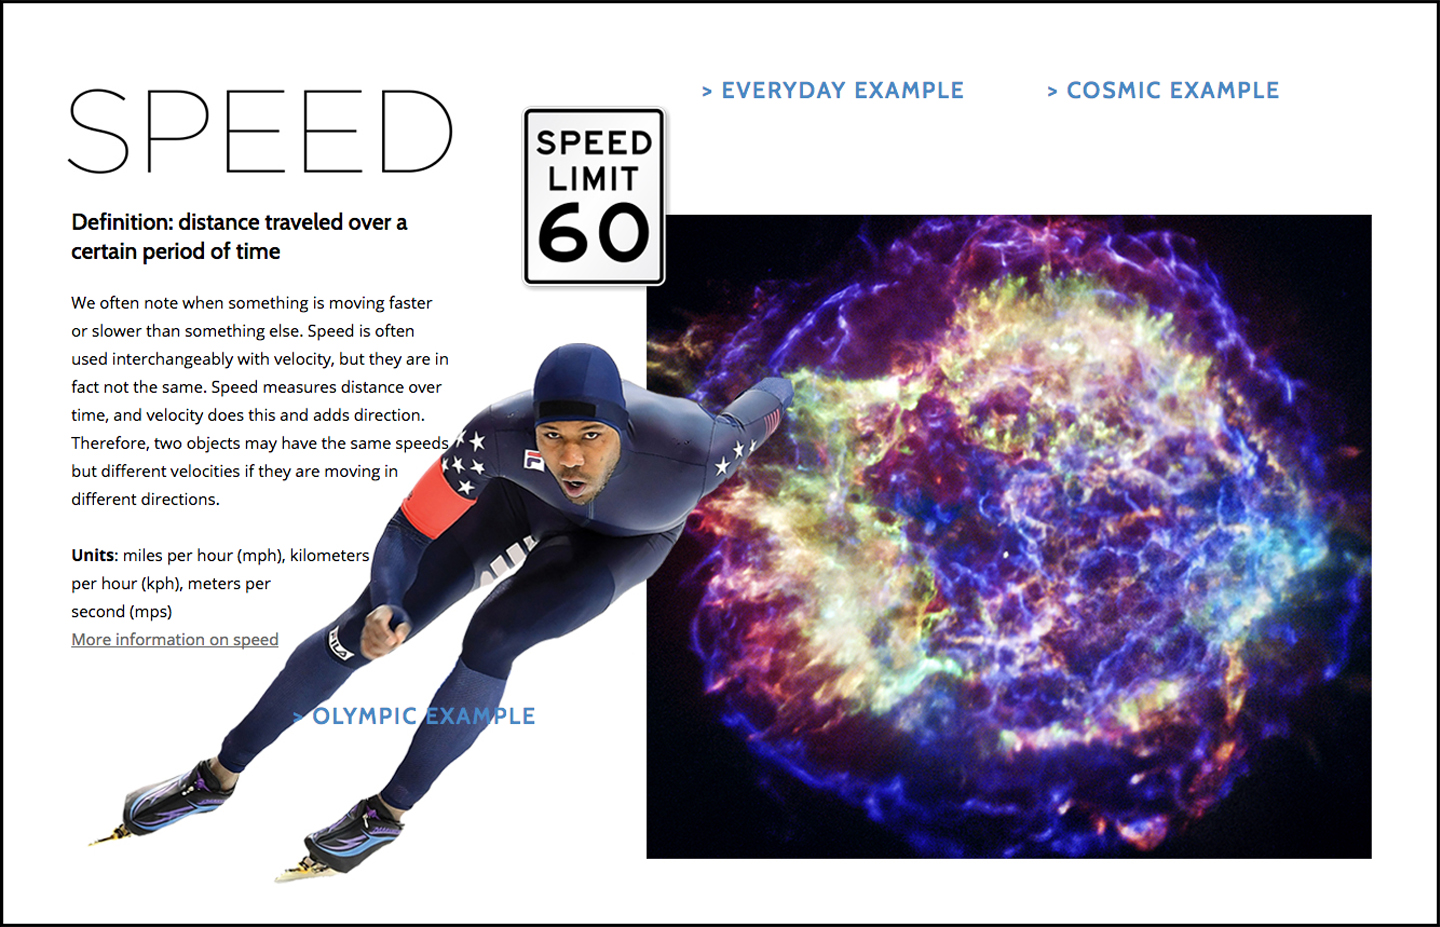 Chandra and Astrolympics on speed